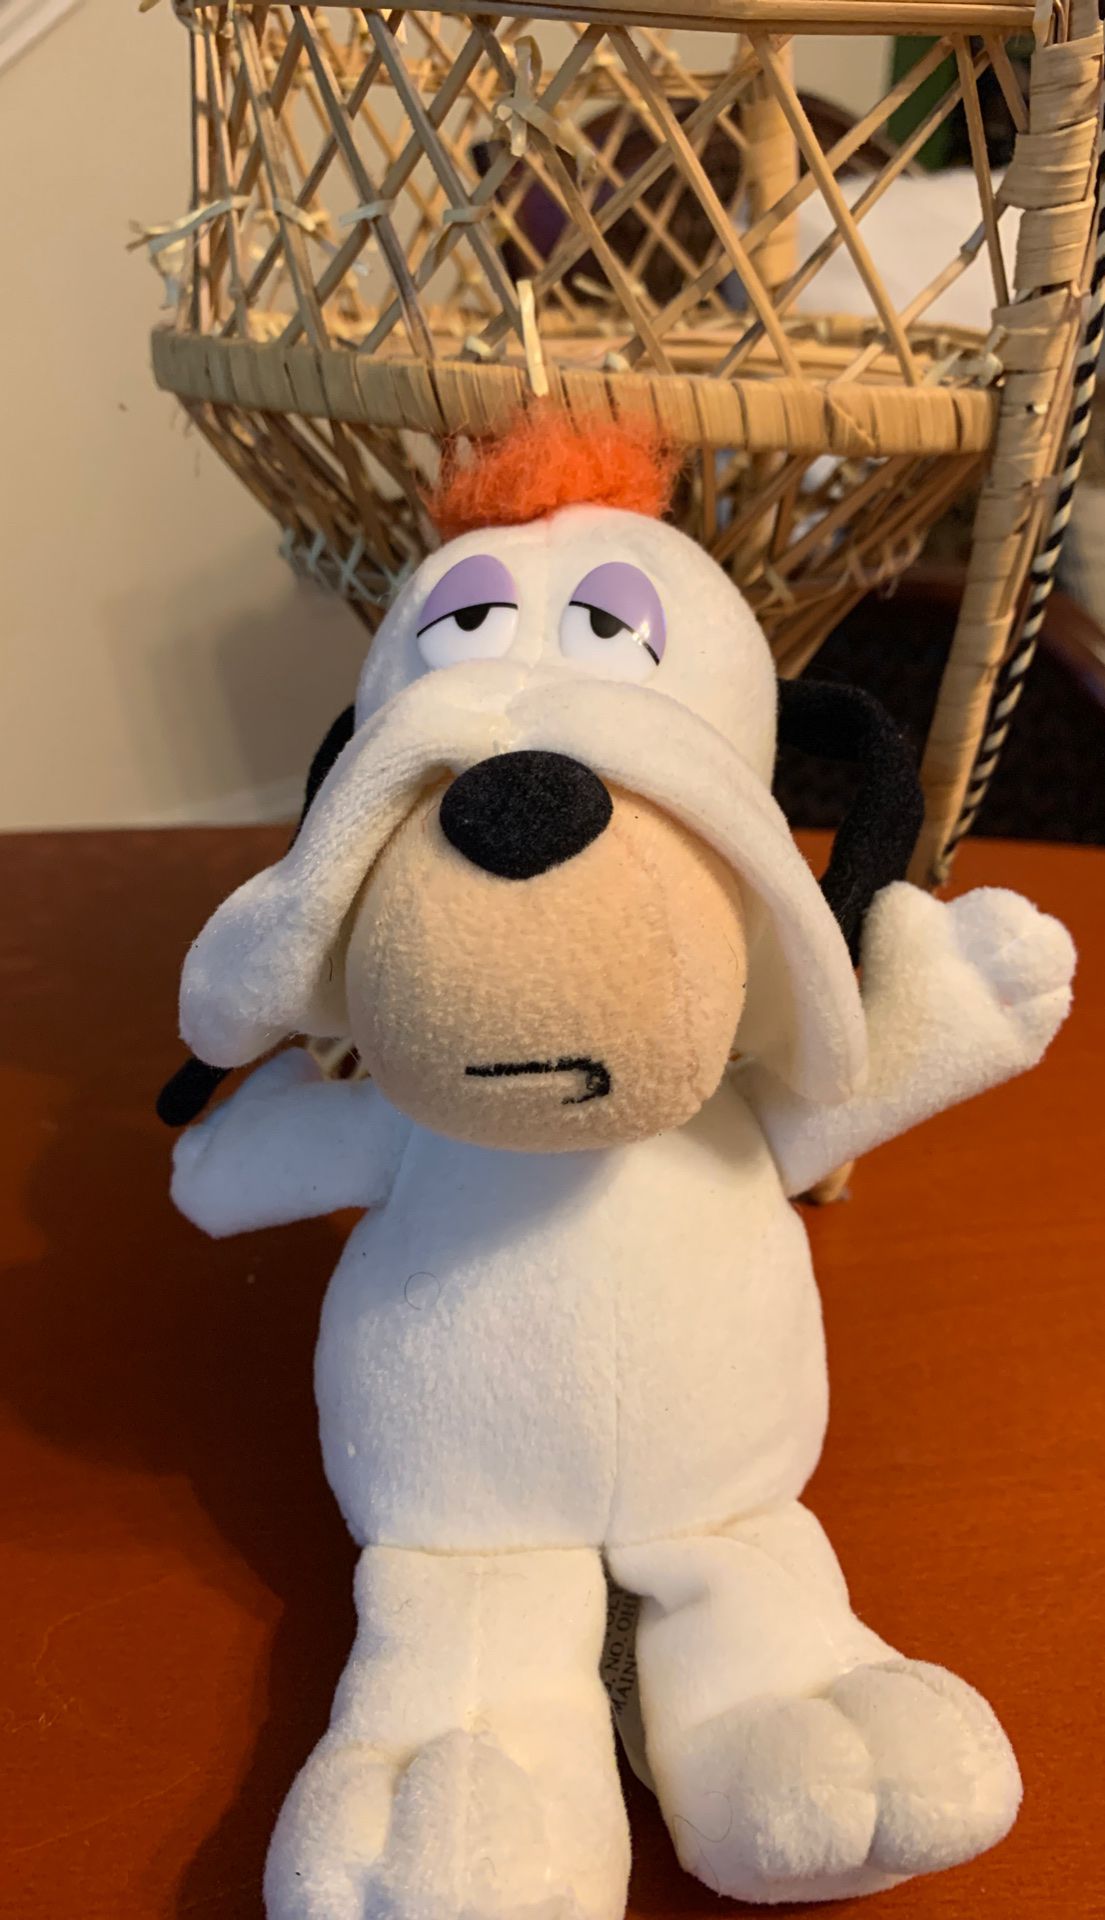 Vintage 1996 Cartoon Network droopy dog stuffed animal 8 inches